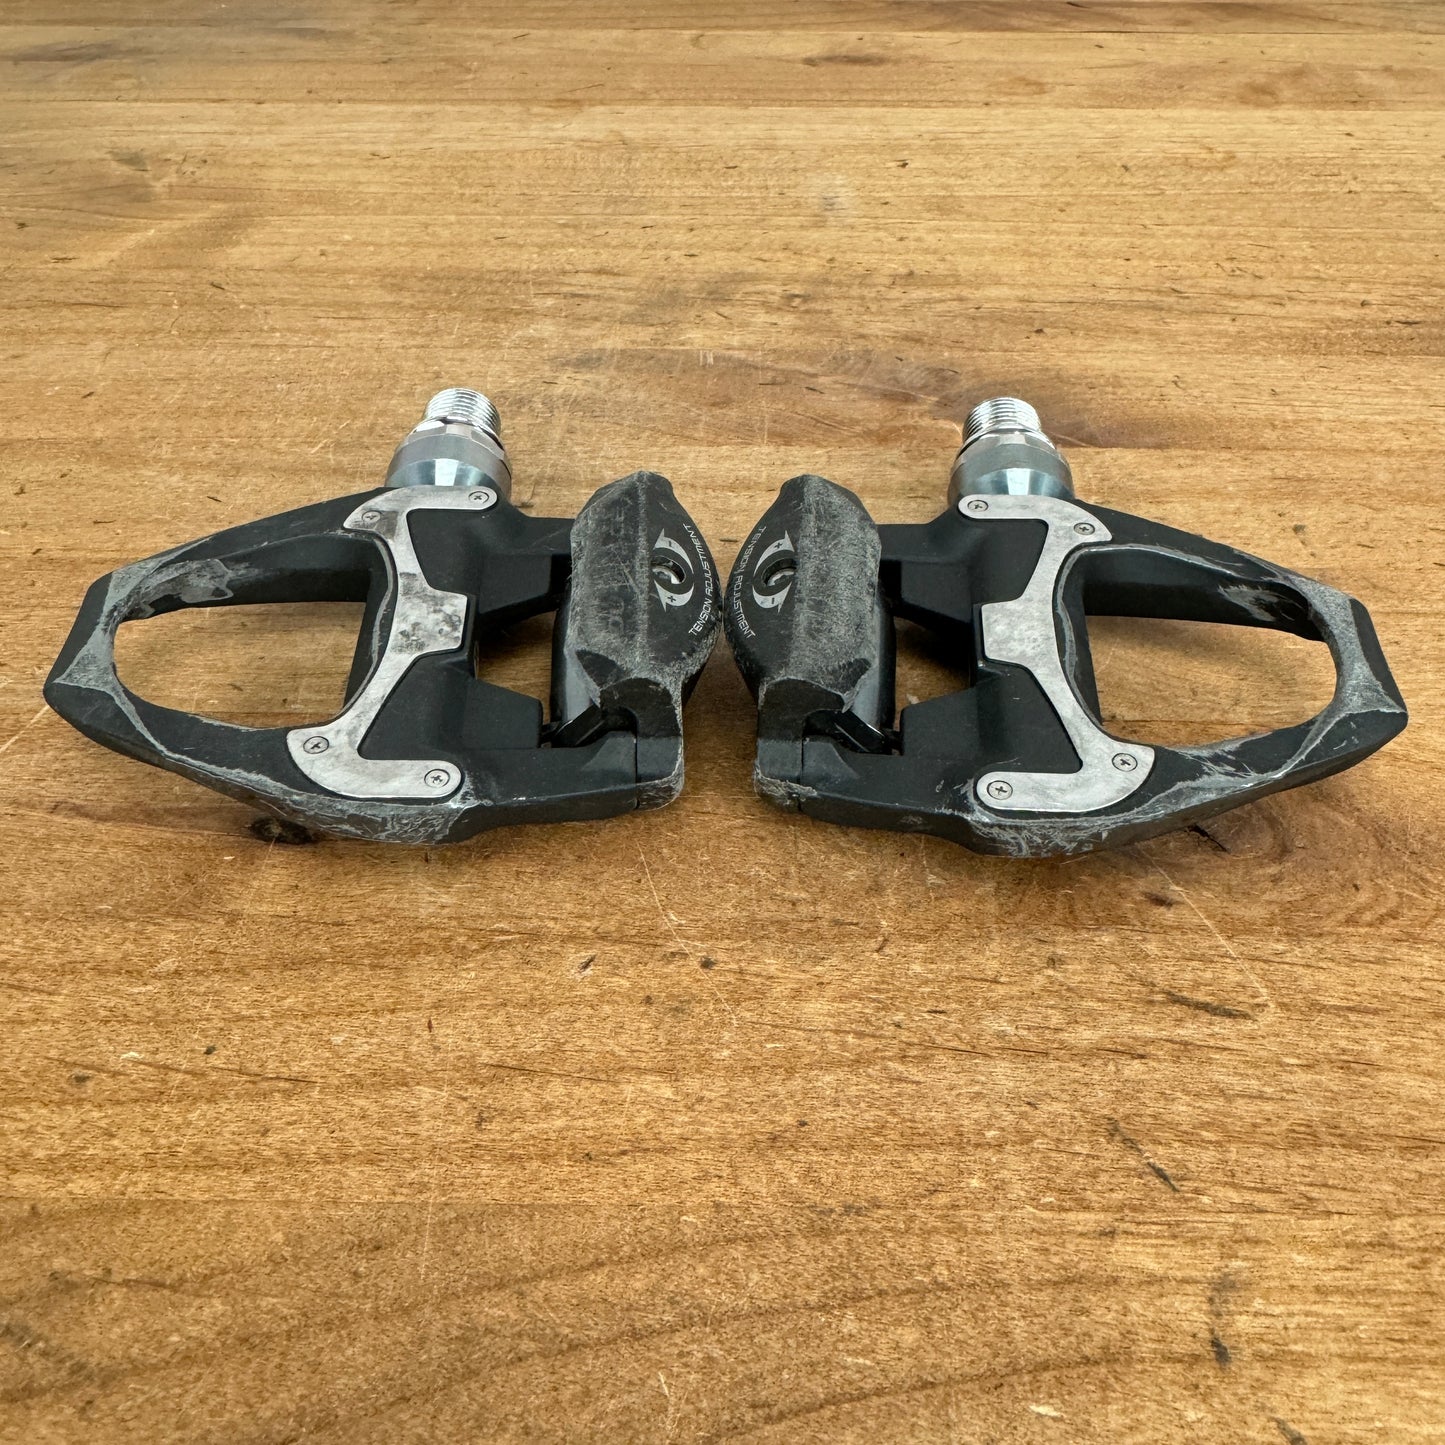 Shimano Dura Ace PD-7900 Carbon Steel Clipless Bike Pedals 250g No Cleats